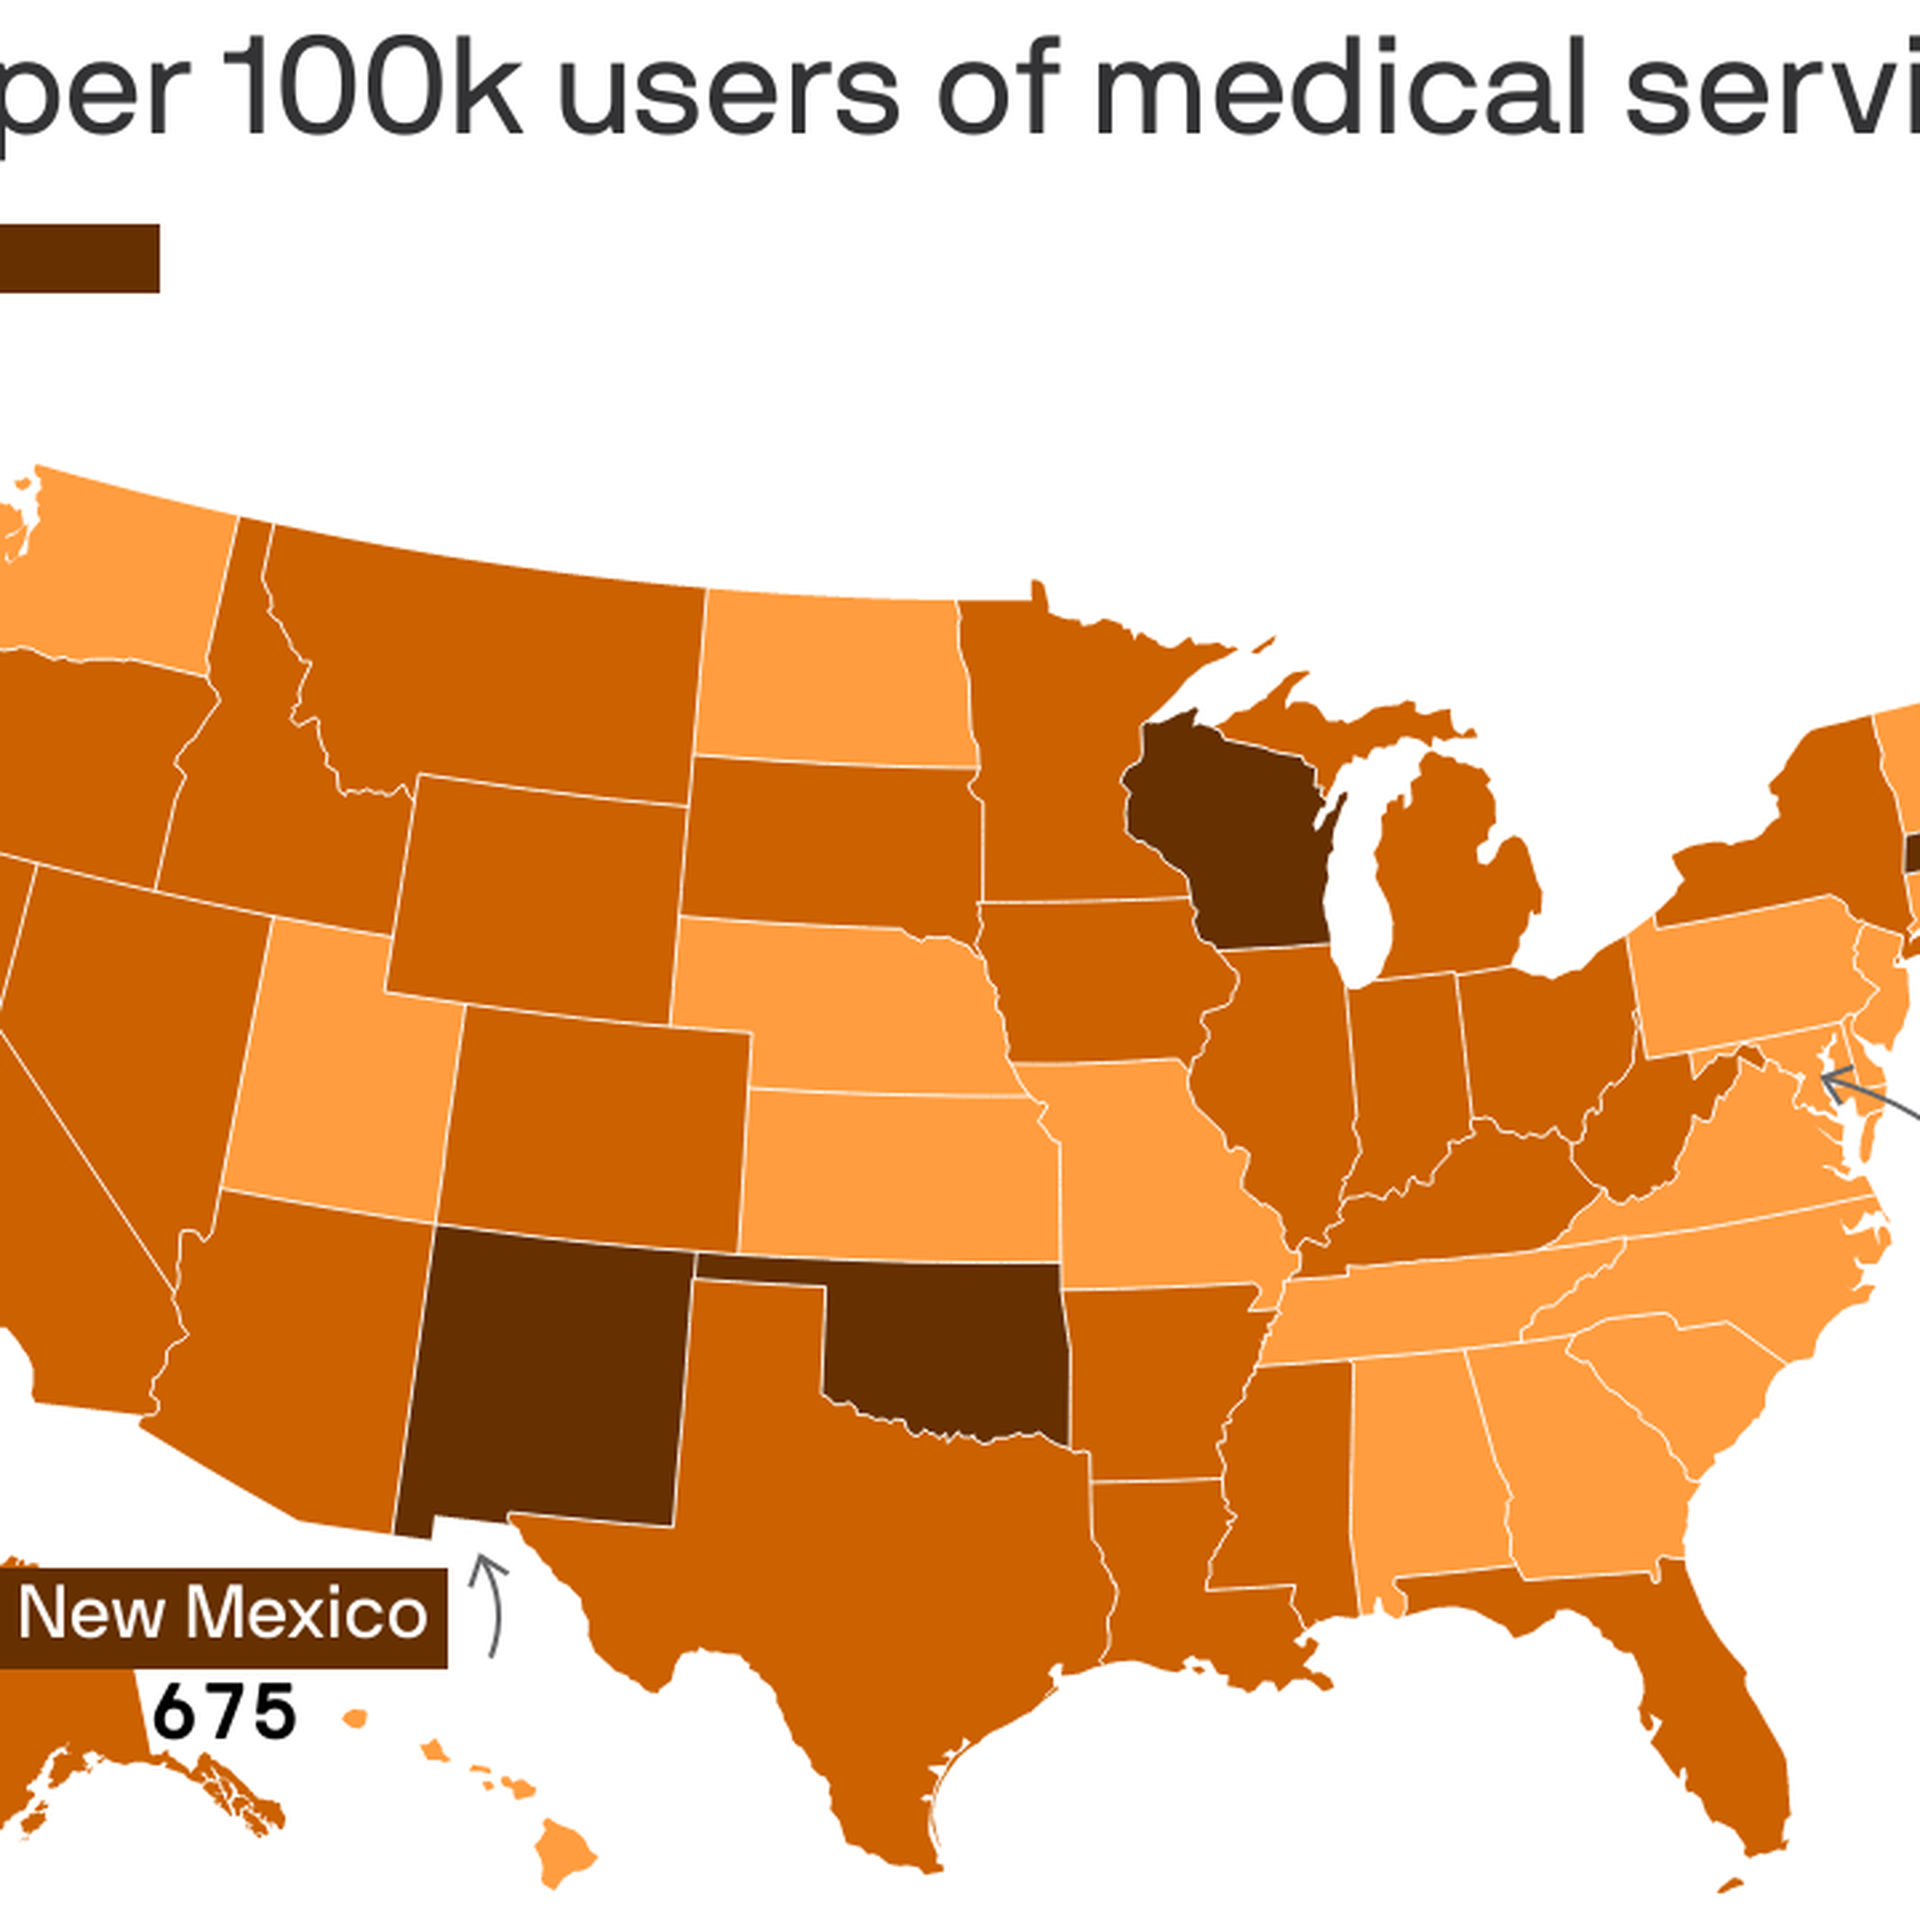 A map showing overdoses per 100K users of medical services by state